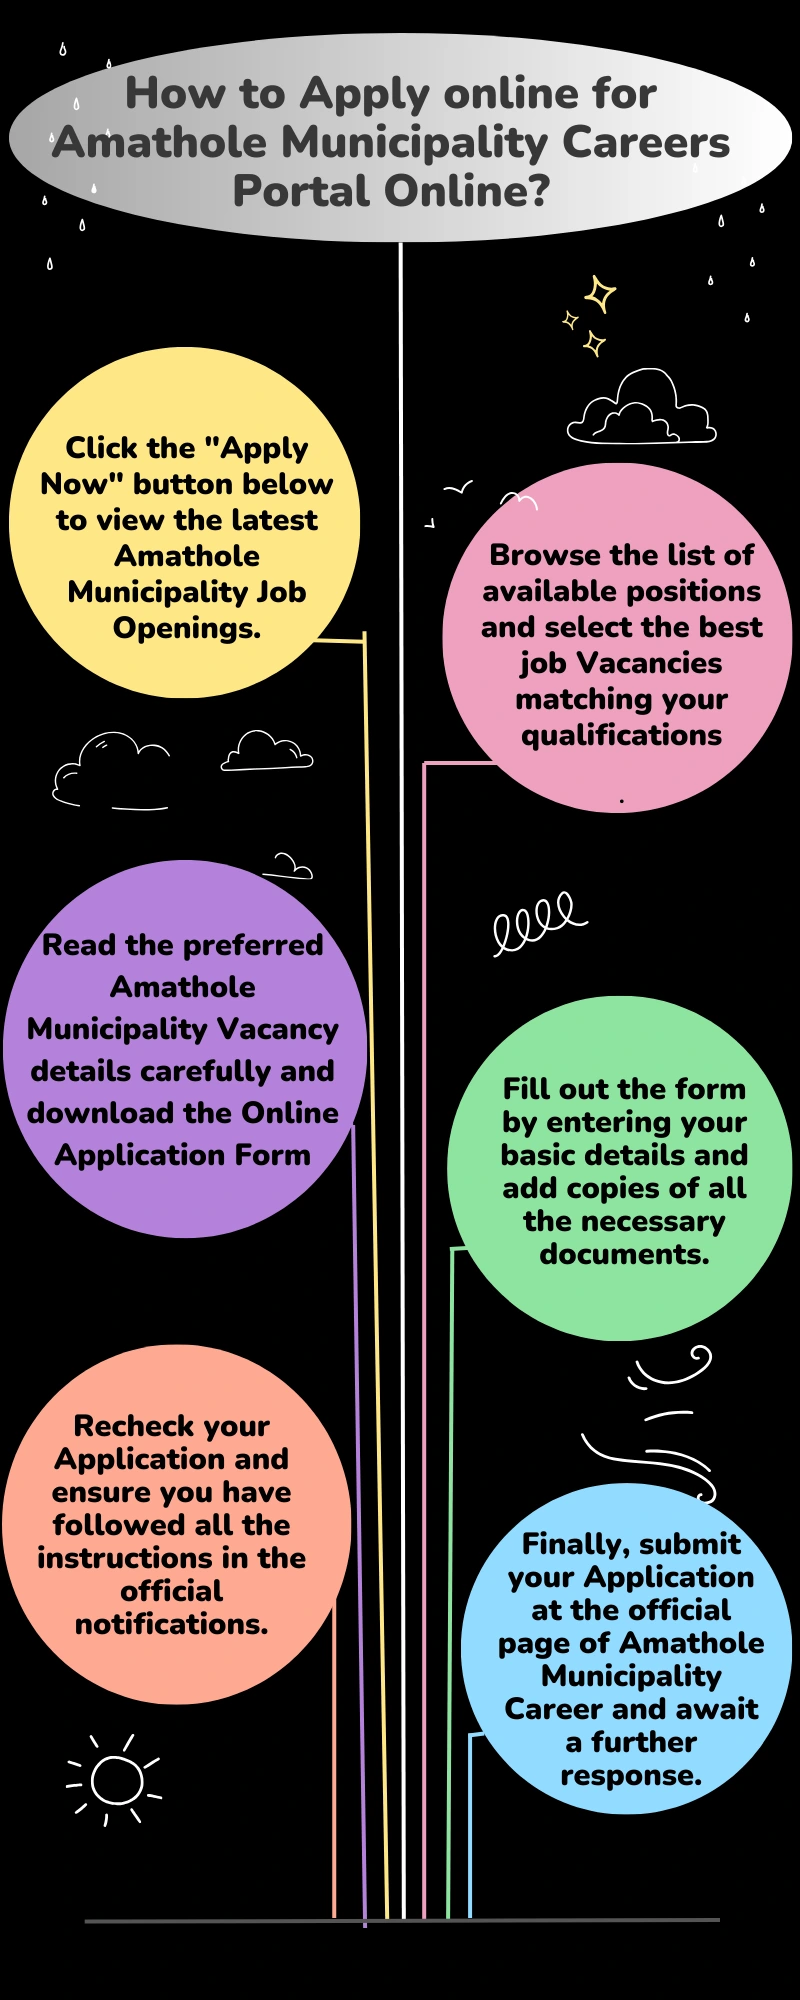 How to Apply online for Amathole Municipality Careers Portal Online?